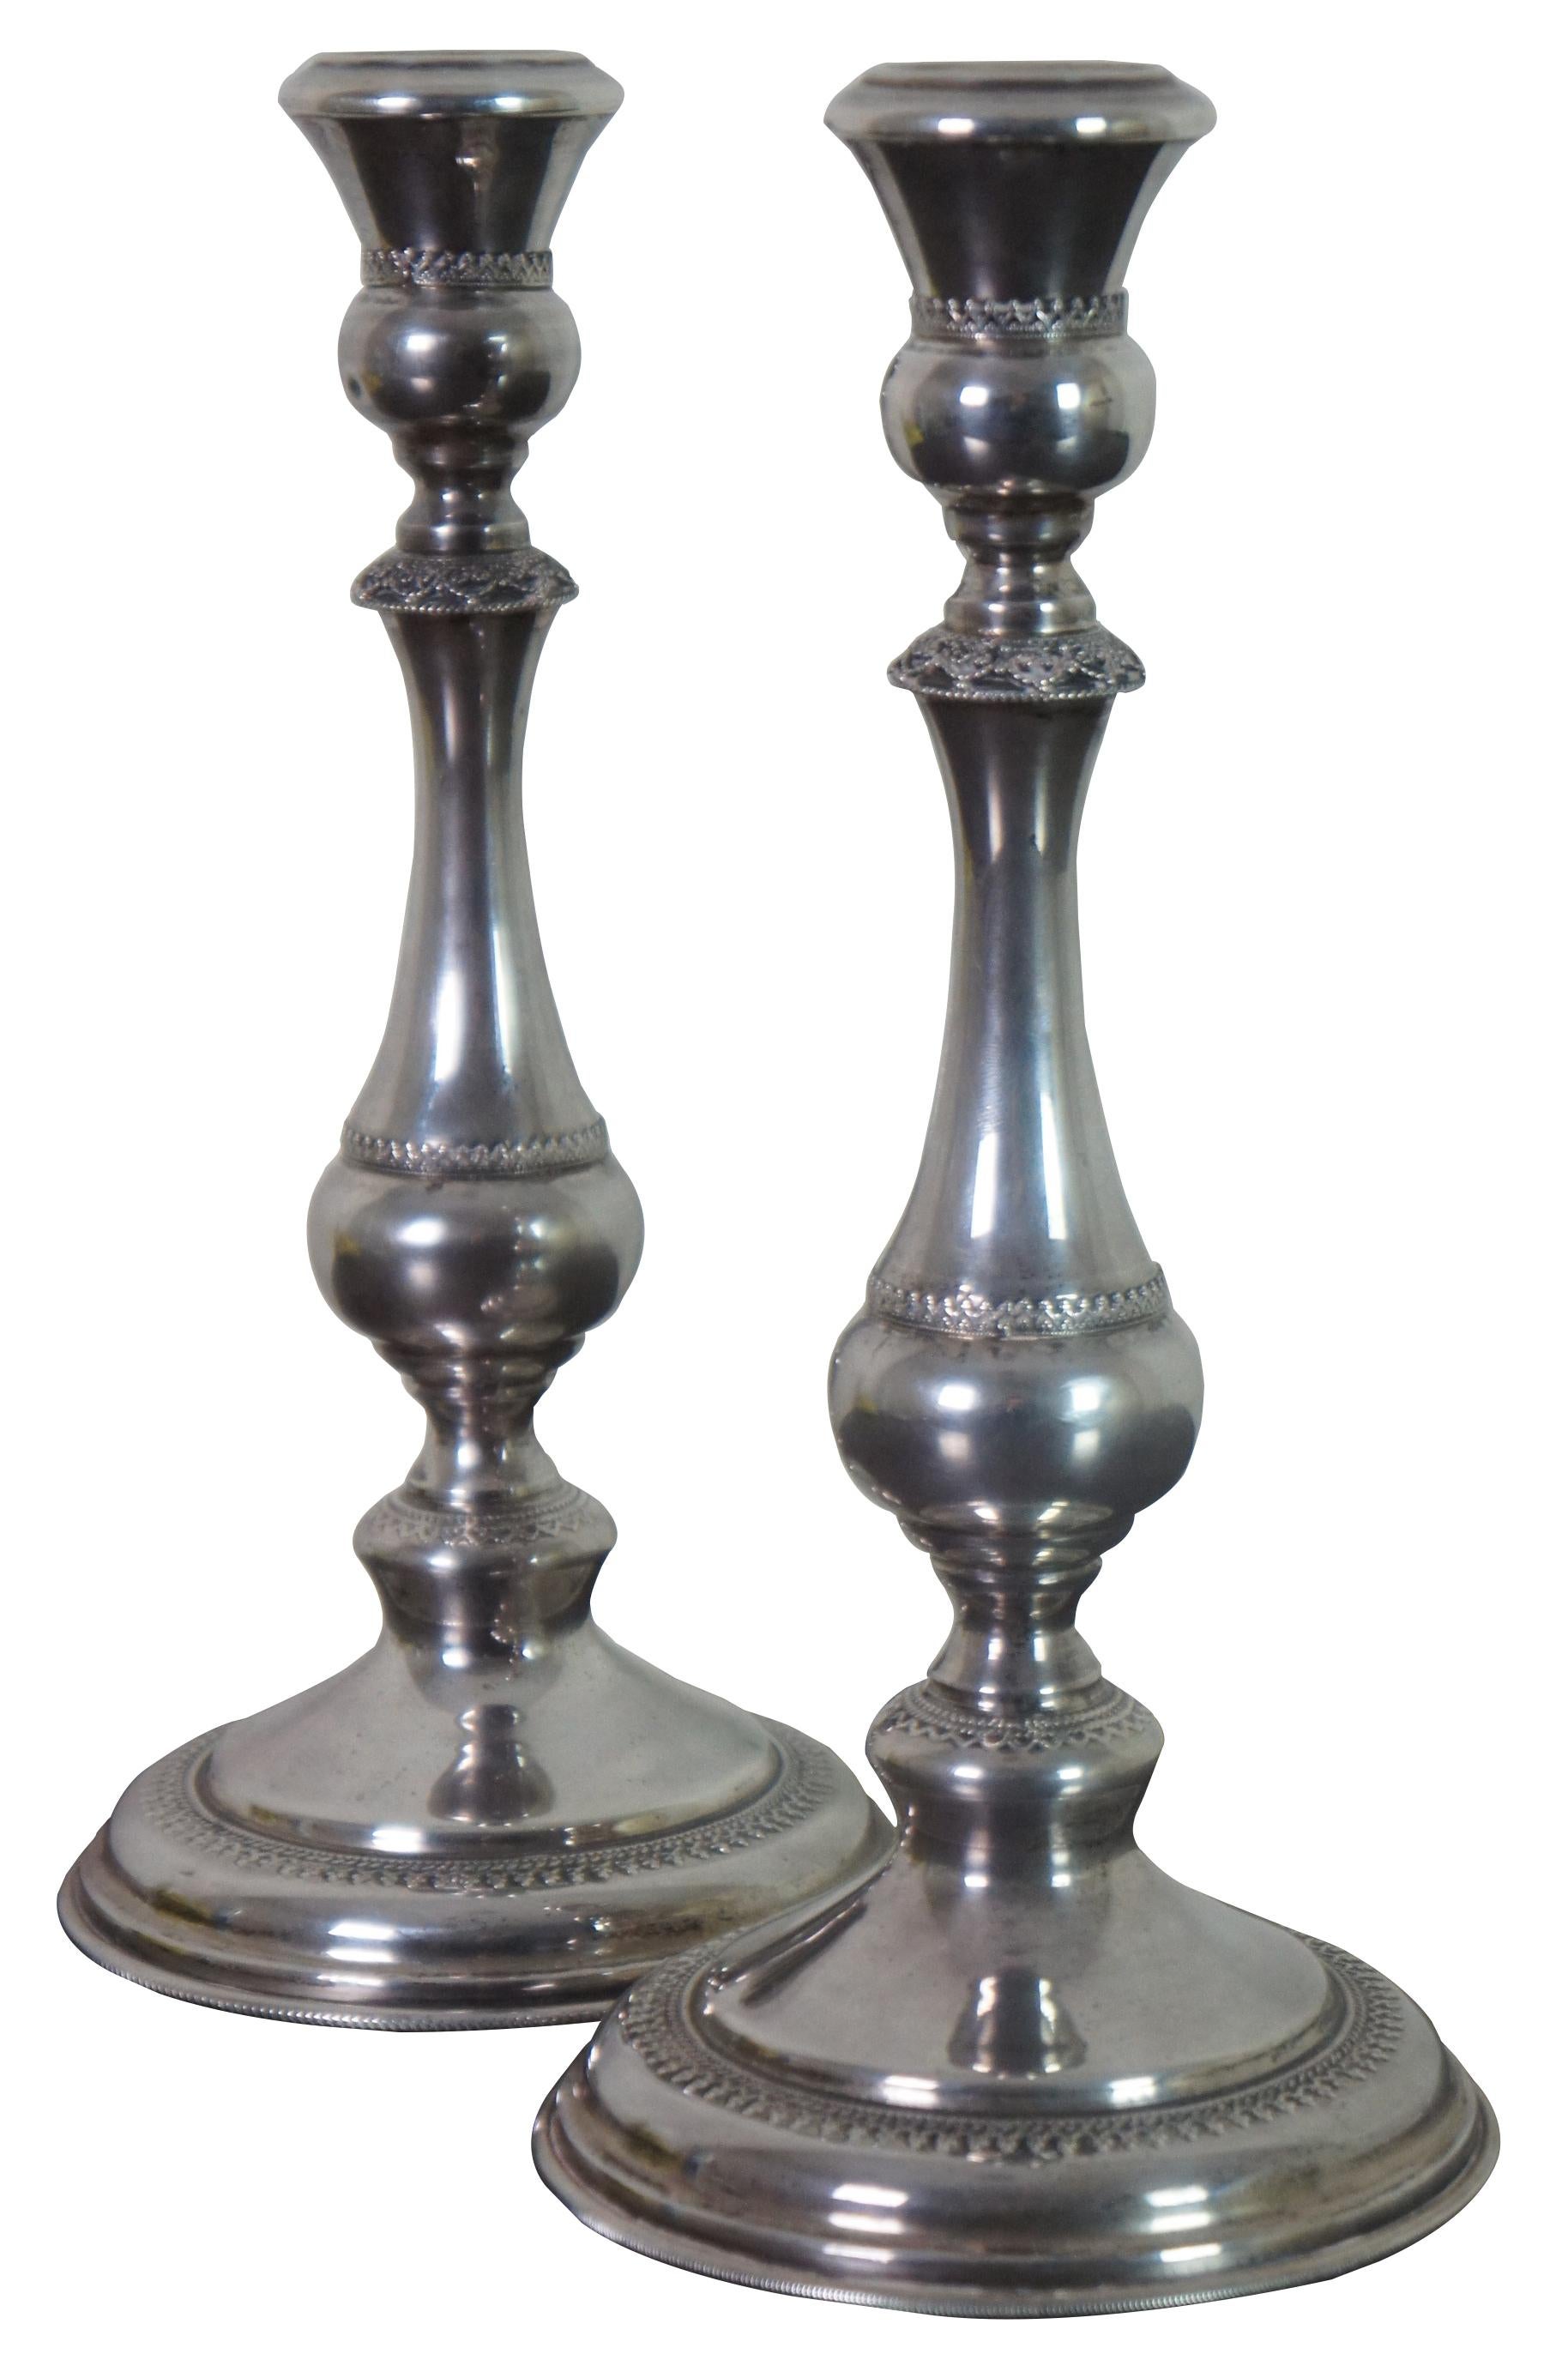 Vintage pair of Ben Zion Israel sterling silver candlesticks / Shabbat / holiday candle holders with ornated tapered form and scalloped details. Marked inside cups.

Provenance : Jerome Schottenstein Estate, Columbus Ohio. Jerome was was an